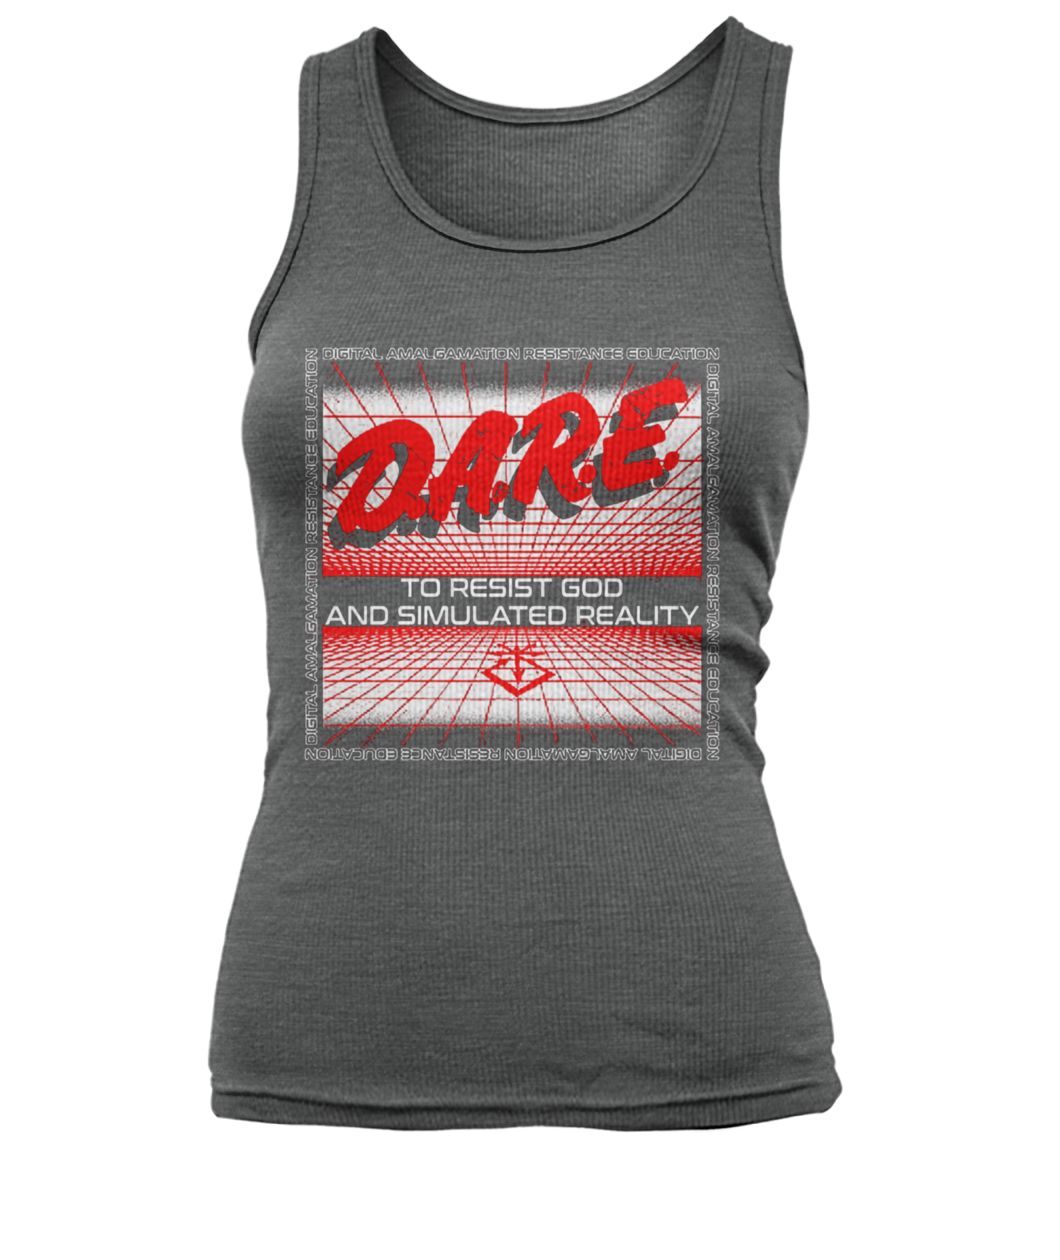 Dare to resist god and simulated reality women's tank top